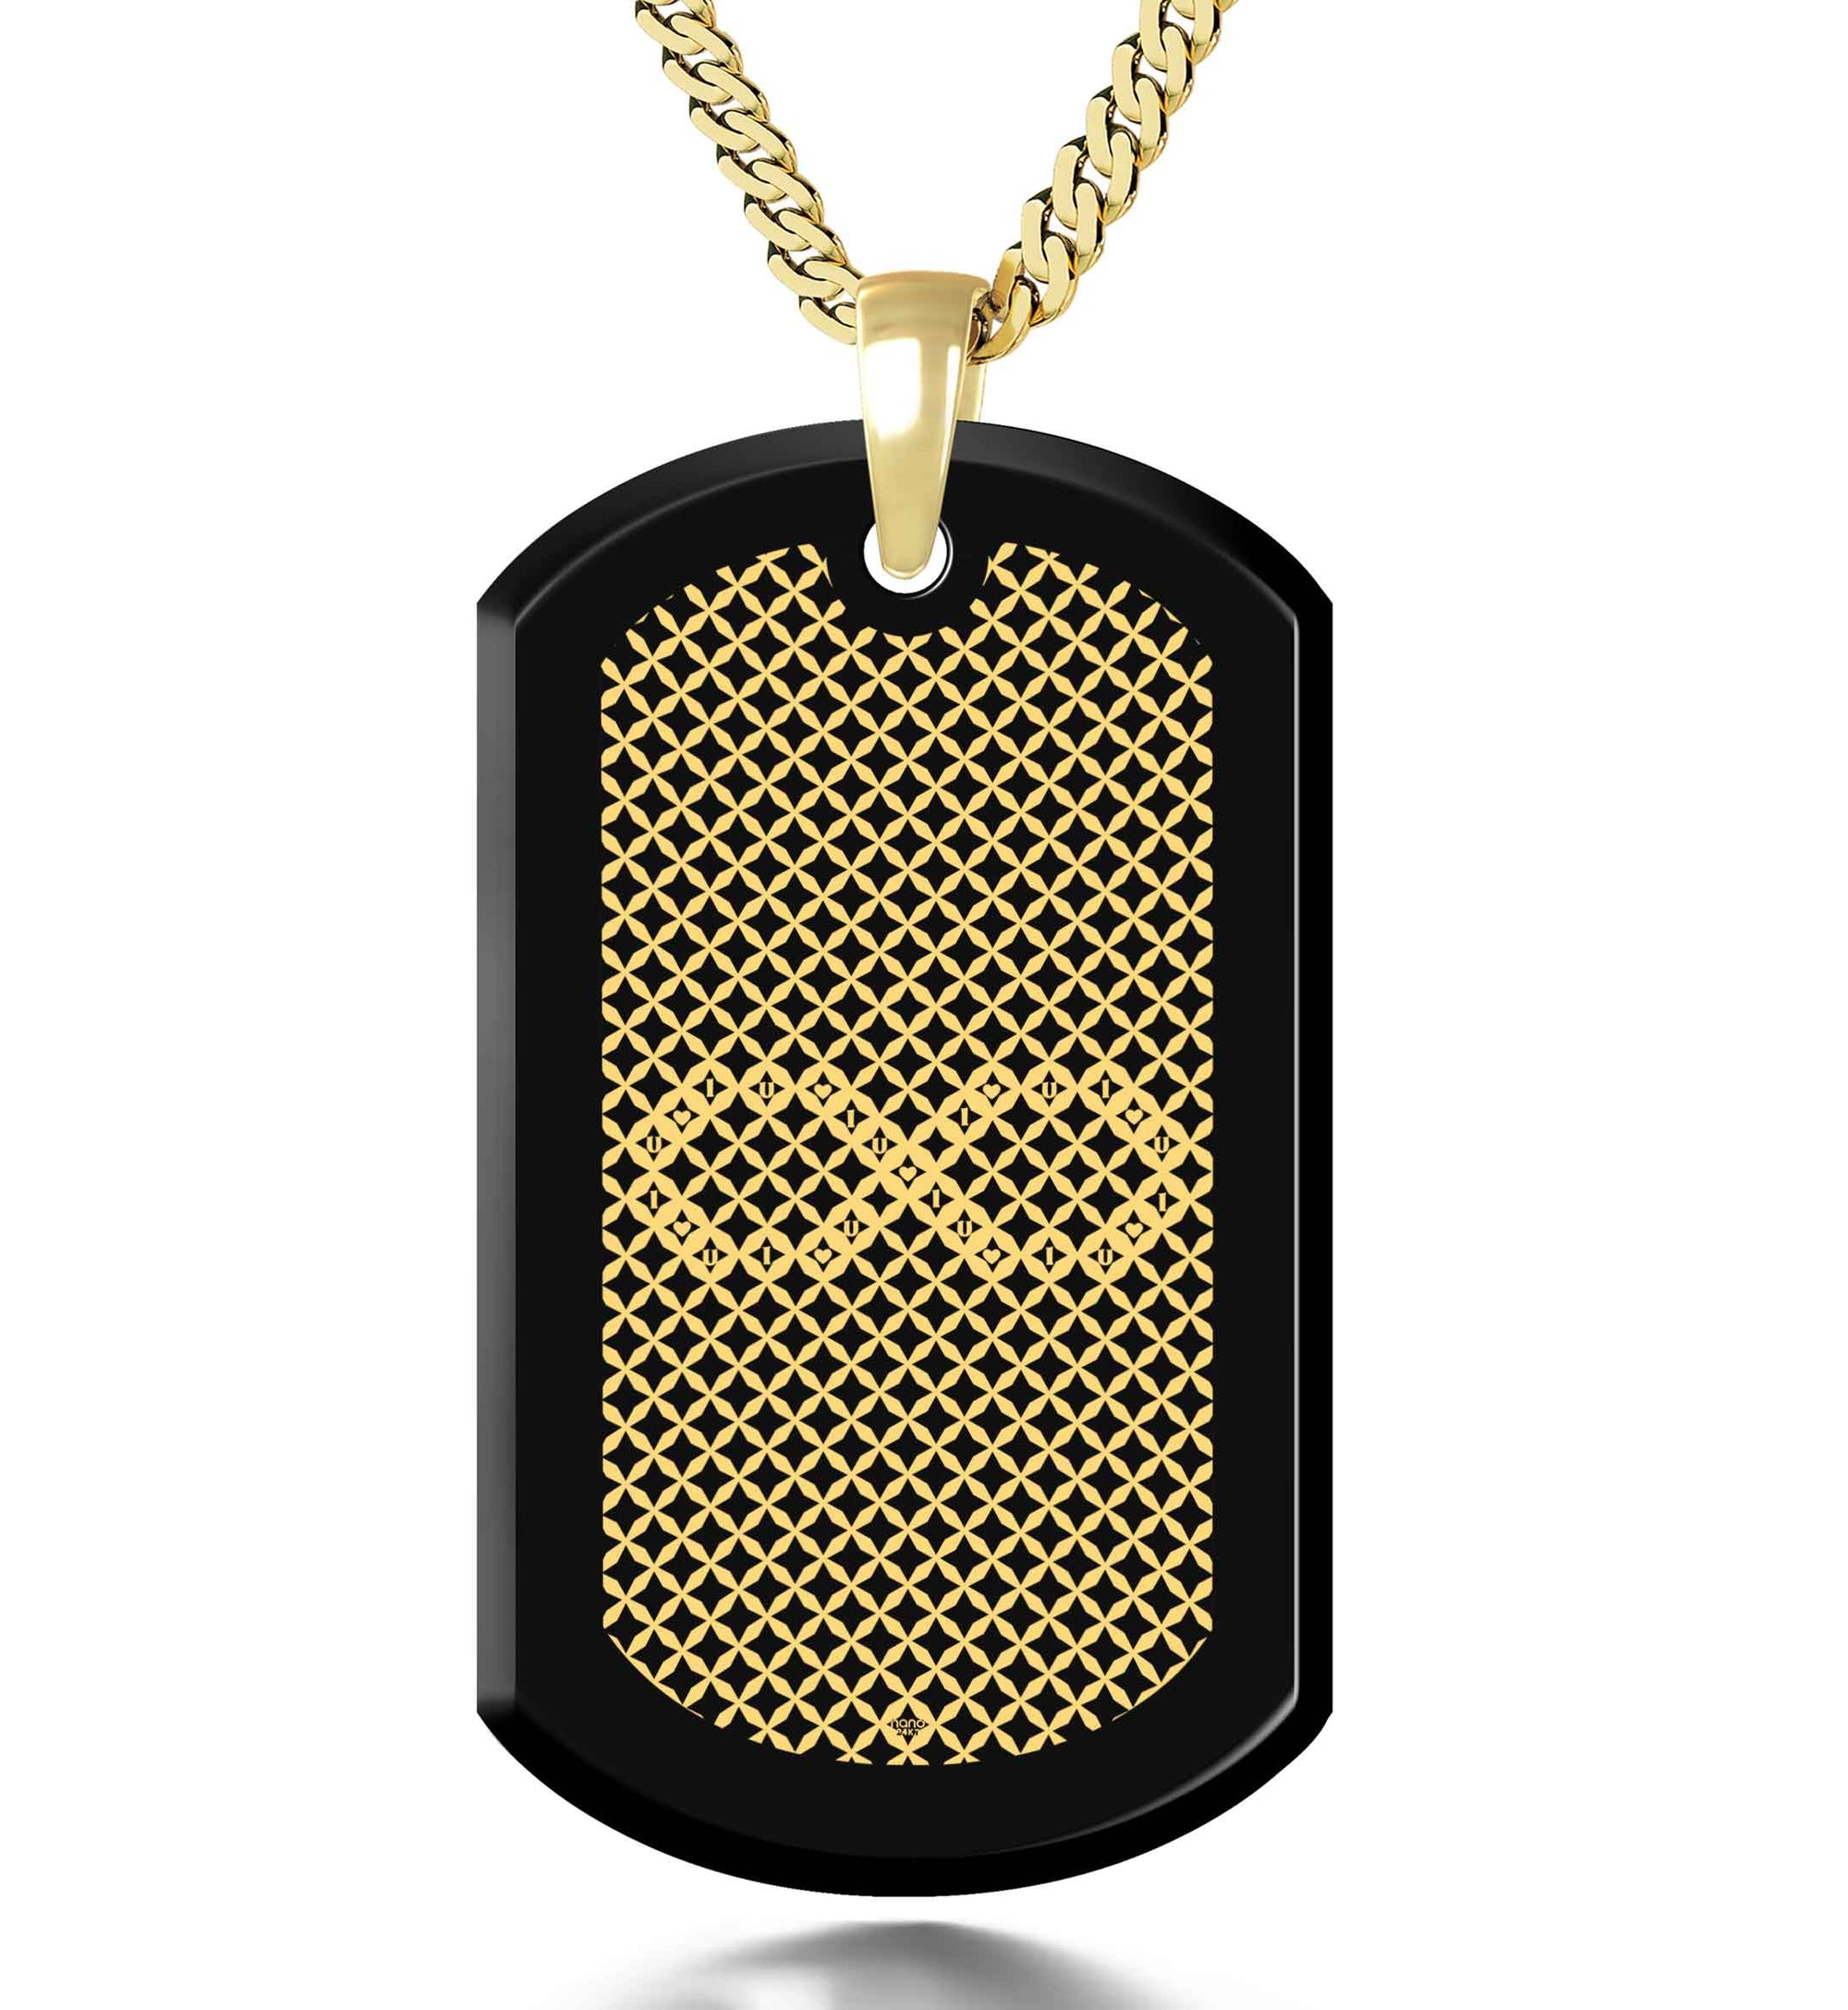 I Love You American Sign Language Dogtag